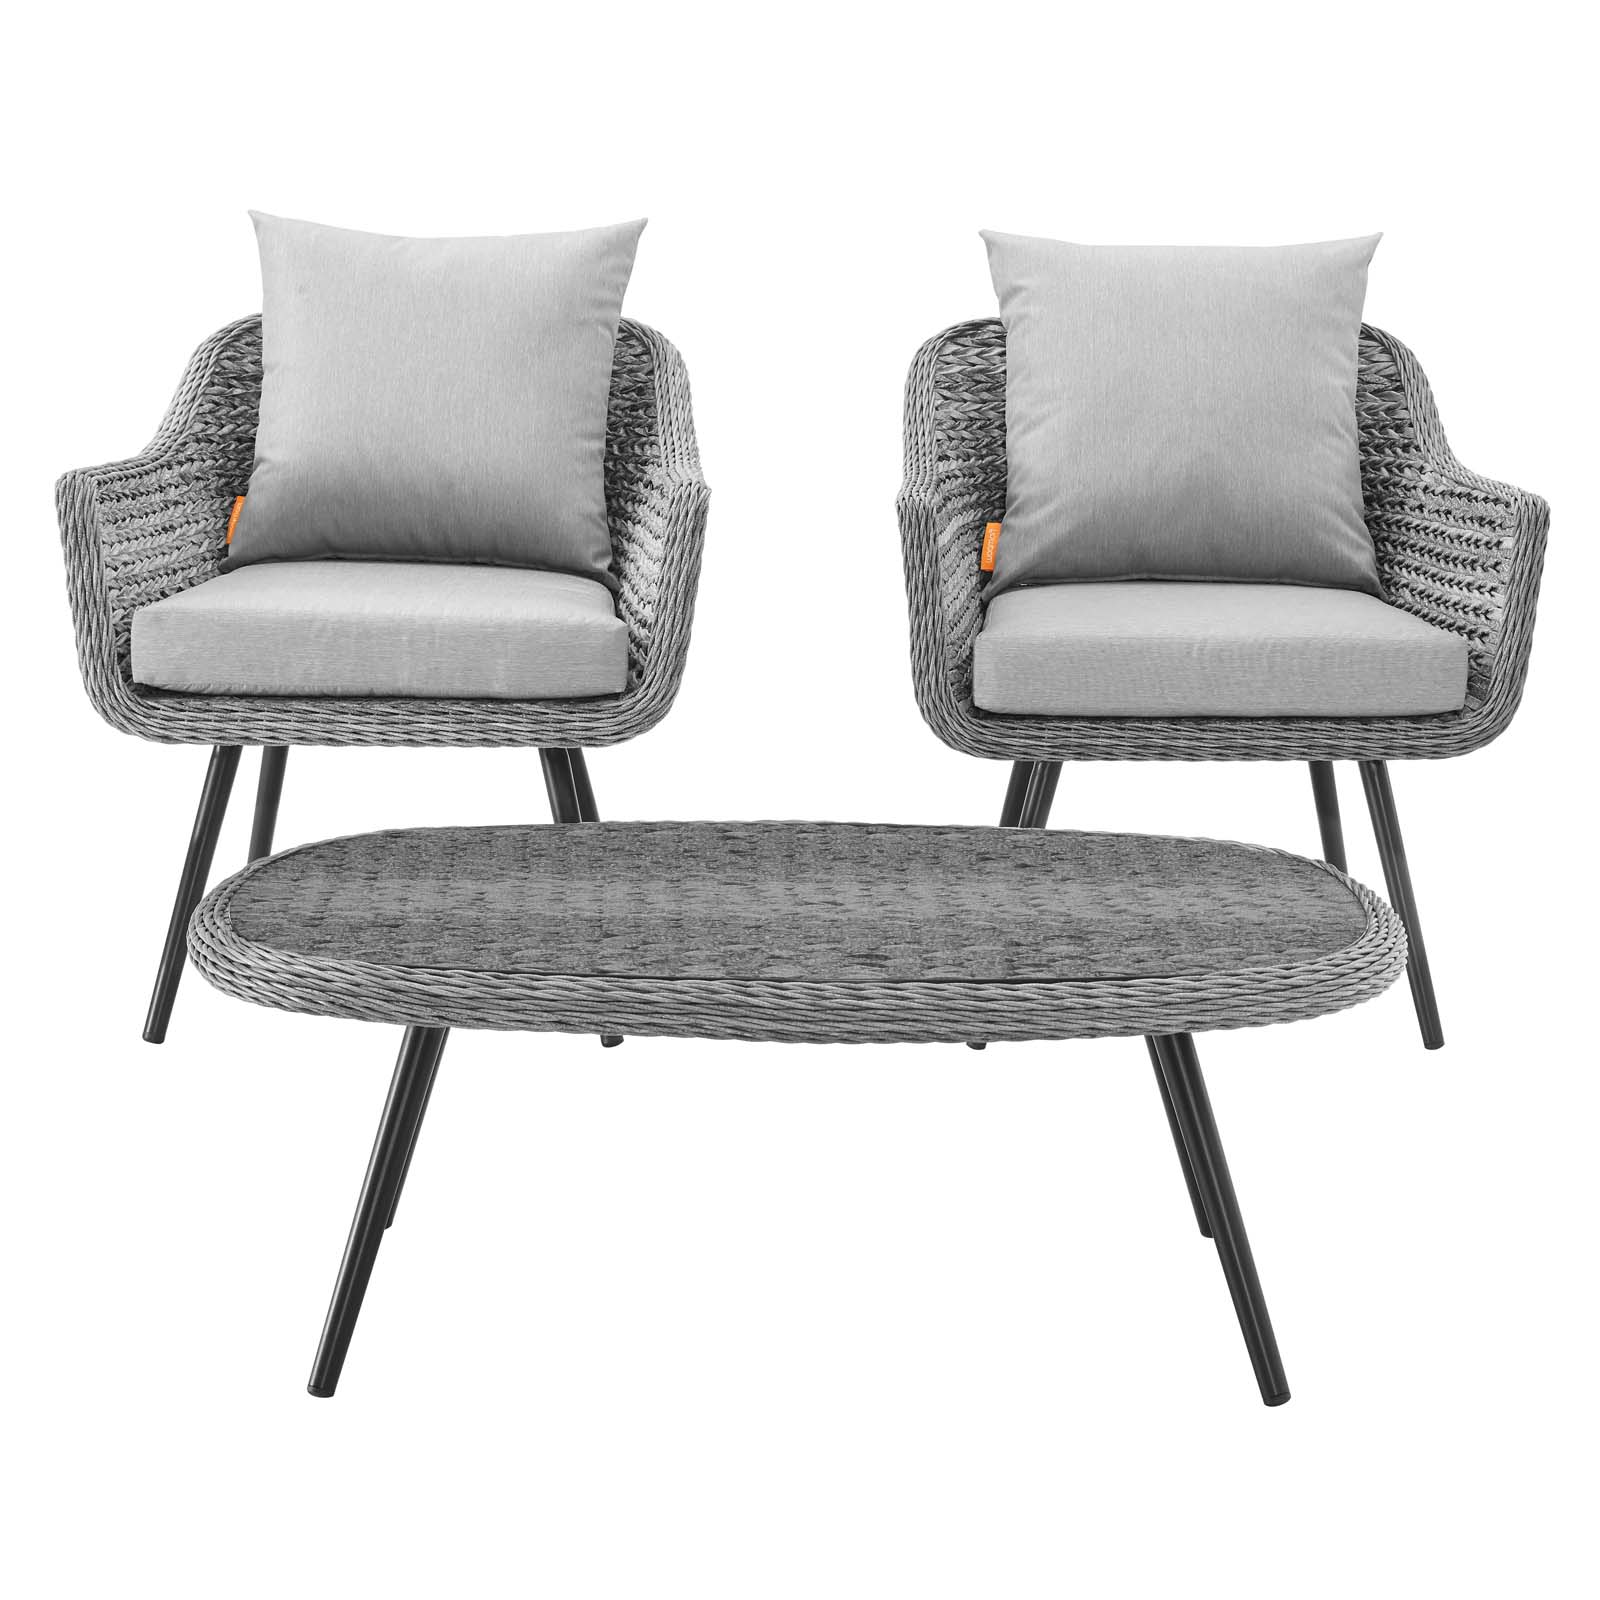 Contemporary Modern Urban Designer Outdoor Patio Balcony Garden Furniture Lounge Chair and Coffee Table Set, Aluminum Fabric Wicker Rattan, Grey Gray - image 2 of 8